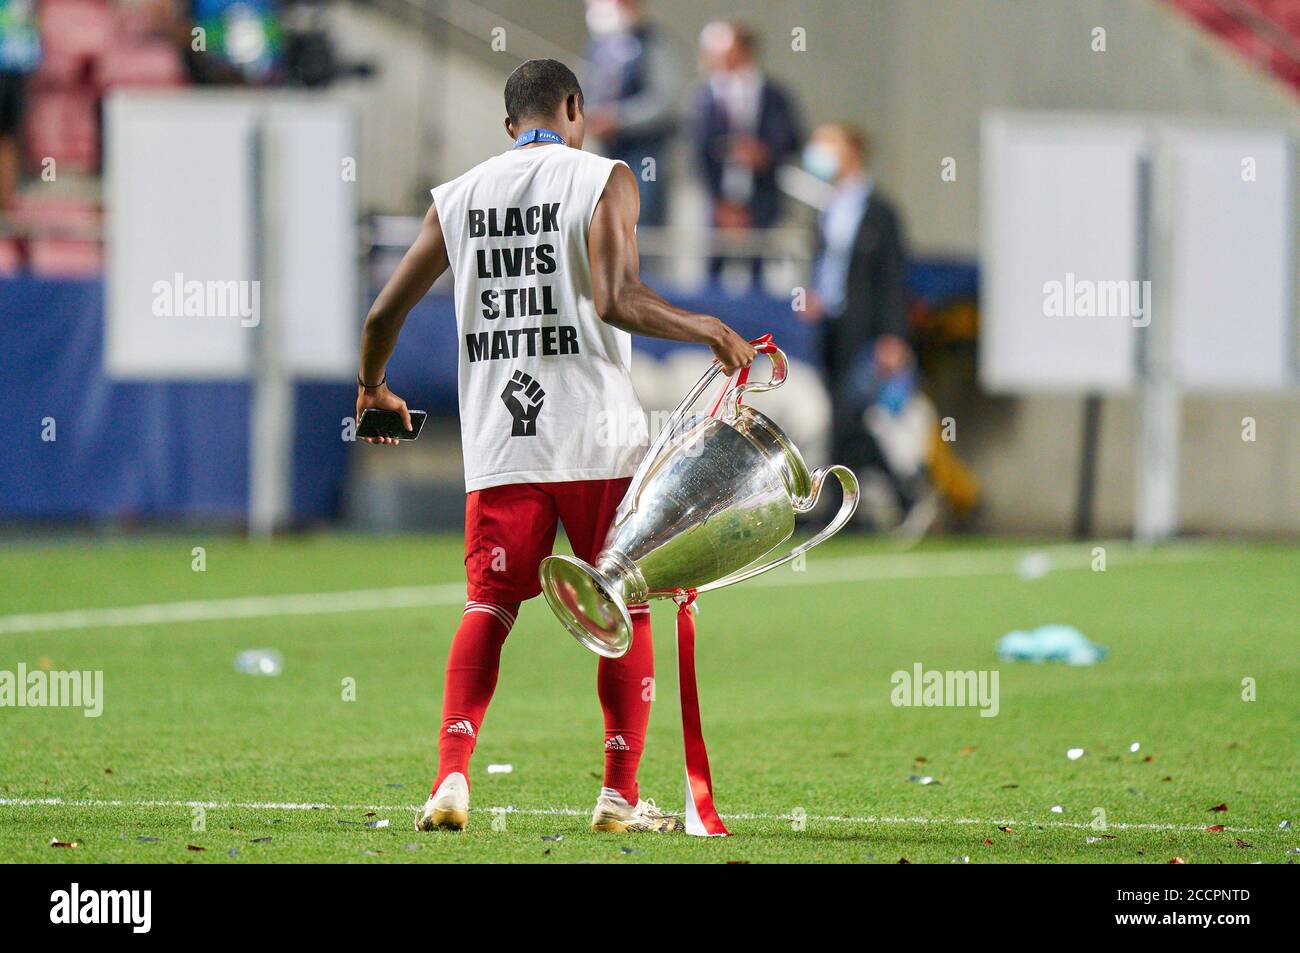 Lisbon, Lissabon, Portugal, 23rd August 2020.  David ALABA, FCB 27 with t-shirt Black Lives still matter, Politik, gegen Rassismus, Meinung,  team FCB win the trophy in the final match UEFA Champions League, final tournament FC BAYERN MUENCHEN - PARIS ST. GERMAIN (PSG) 1-0 in season 2019/2020, FCB,  © Peter Schatz / Alamy Live News / Pool   - UEFA REGULATIONS PROHIBIT ANY USE OF PHOTOGRAPHS as IMAGE SEQUENCES and/or QUASI-VIDEO -  National and international News-Agencies OUT Editorial Use ONLY Stock Photo